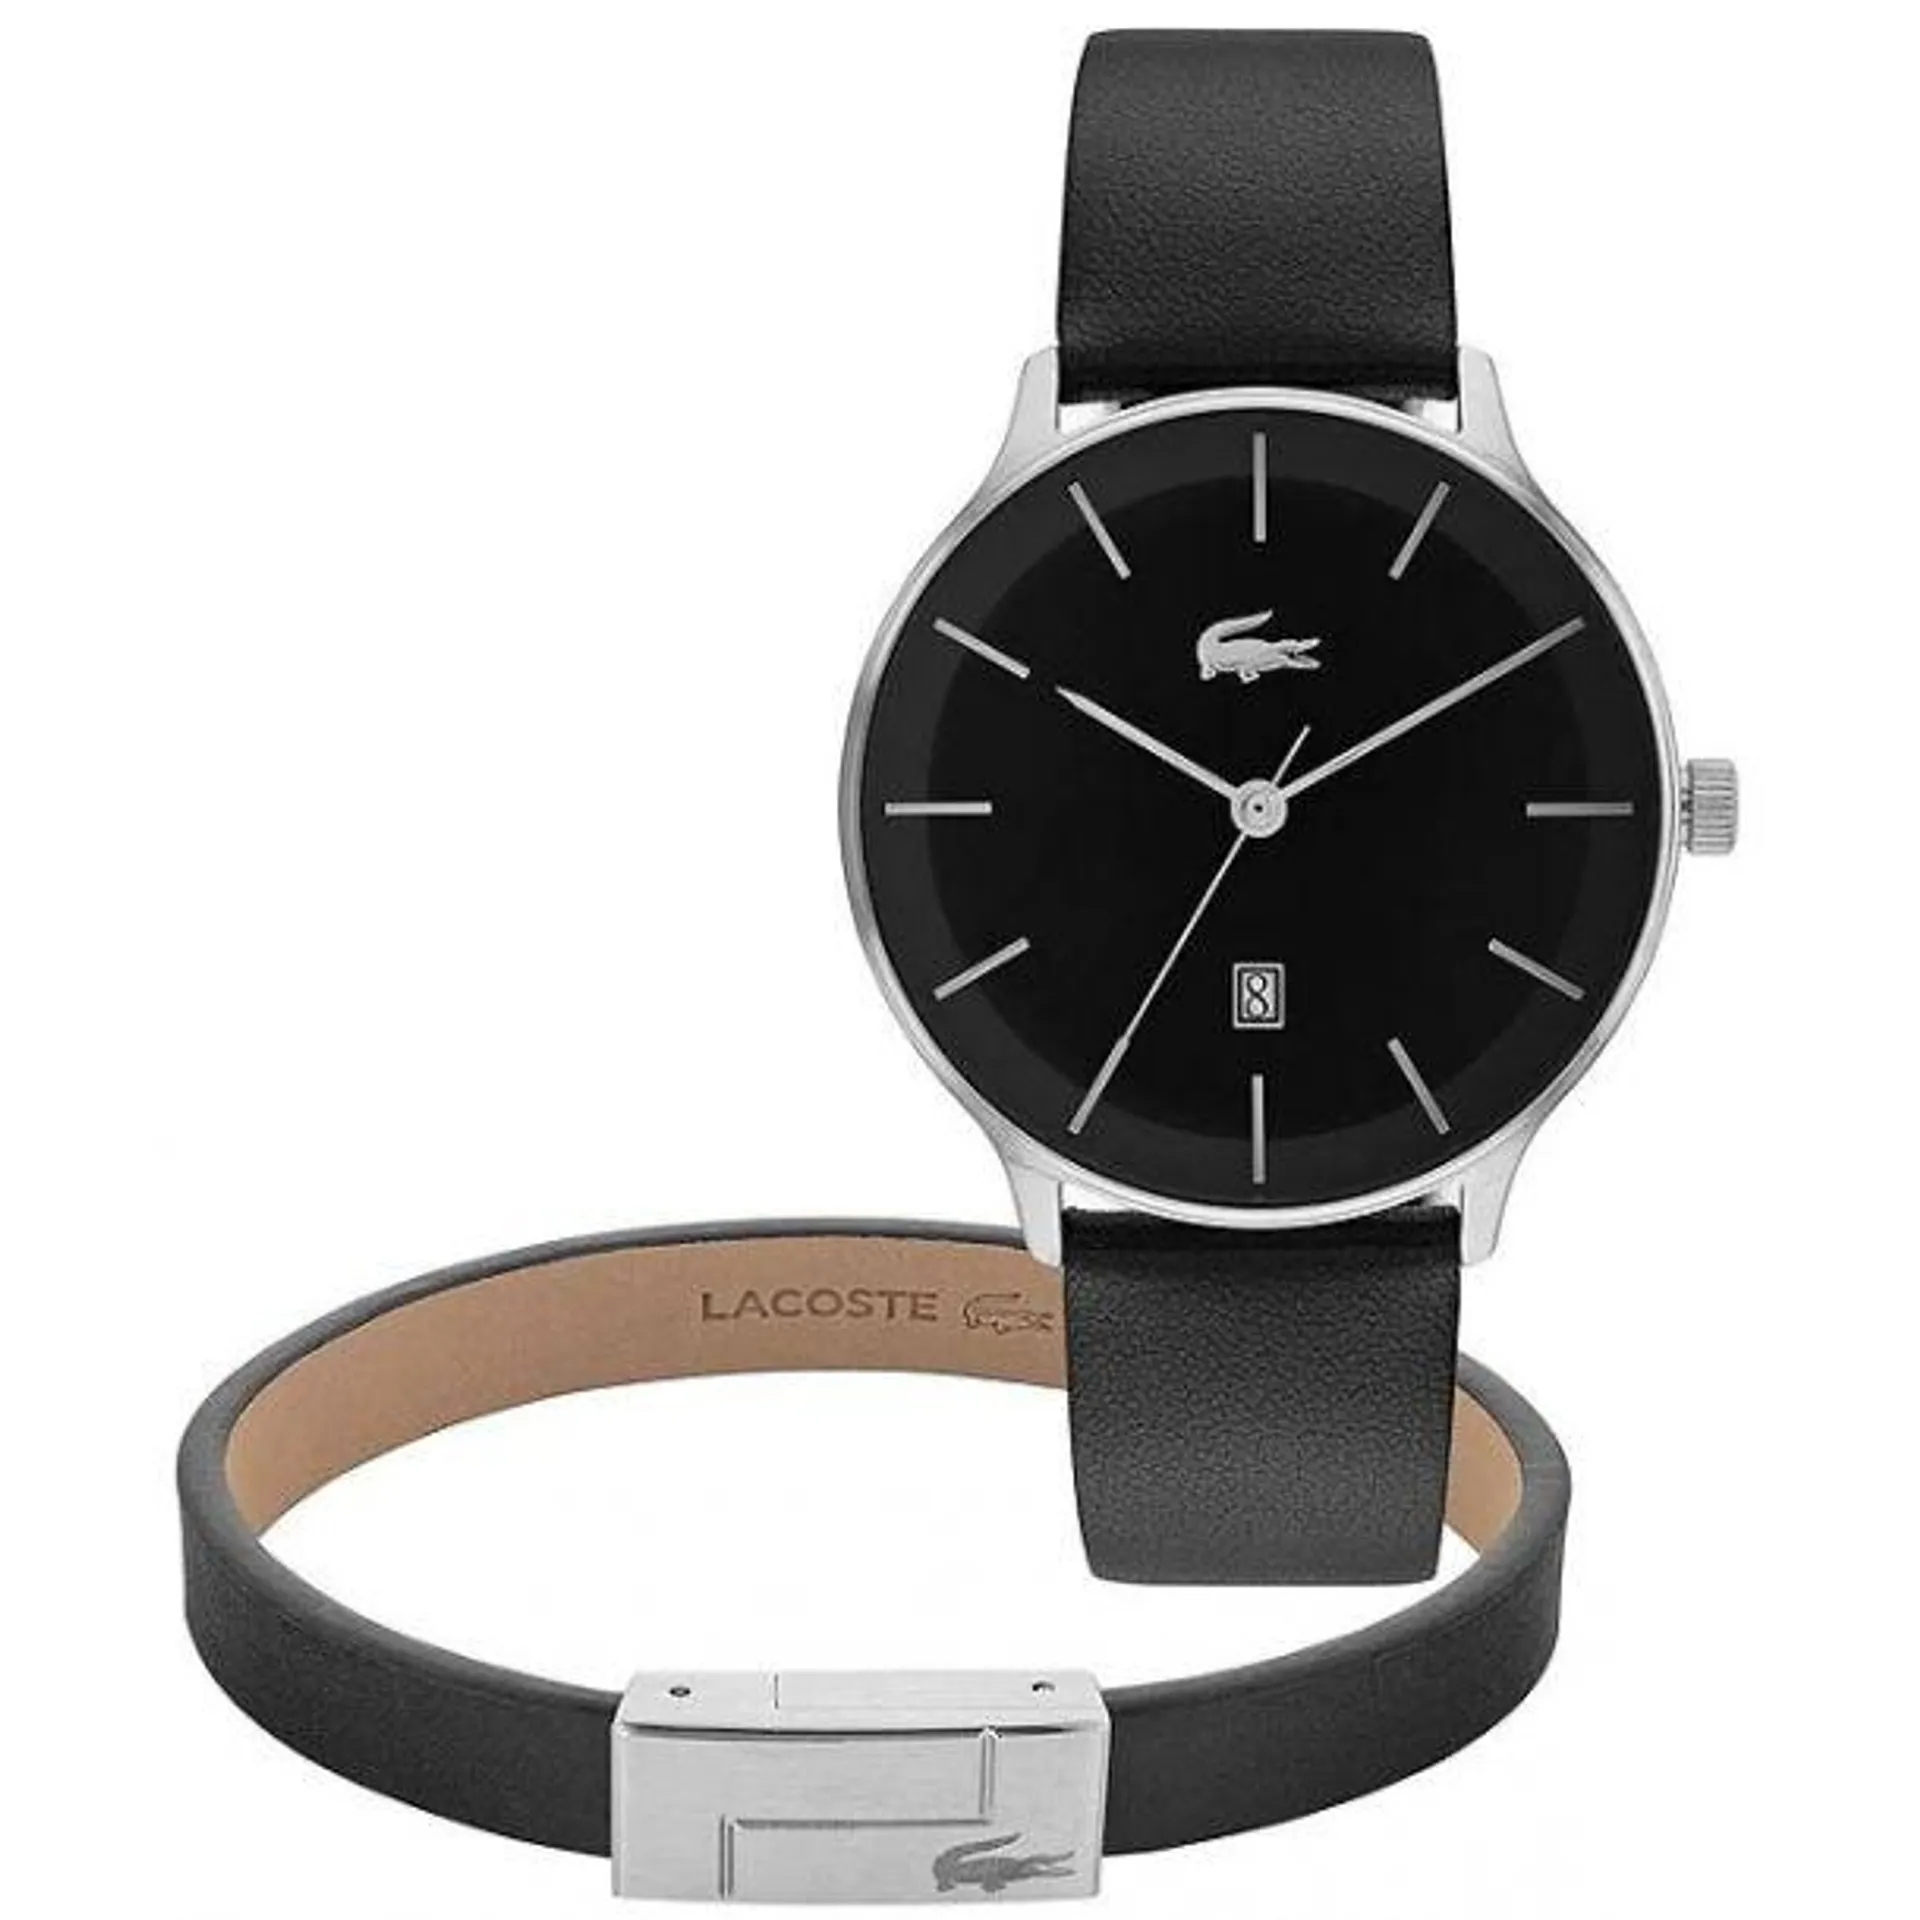 Lacoste Men's Lacoste Club Three-Hand Black Leather Strap Watch and Black Leather Line Bracelet